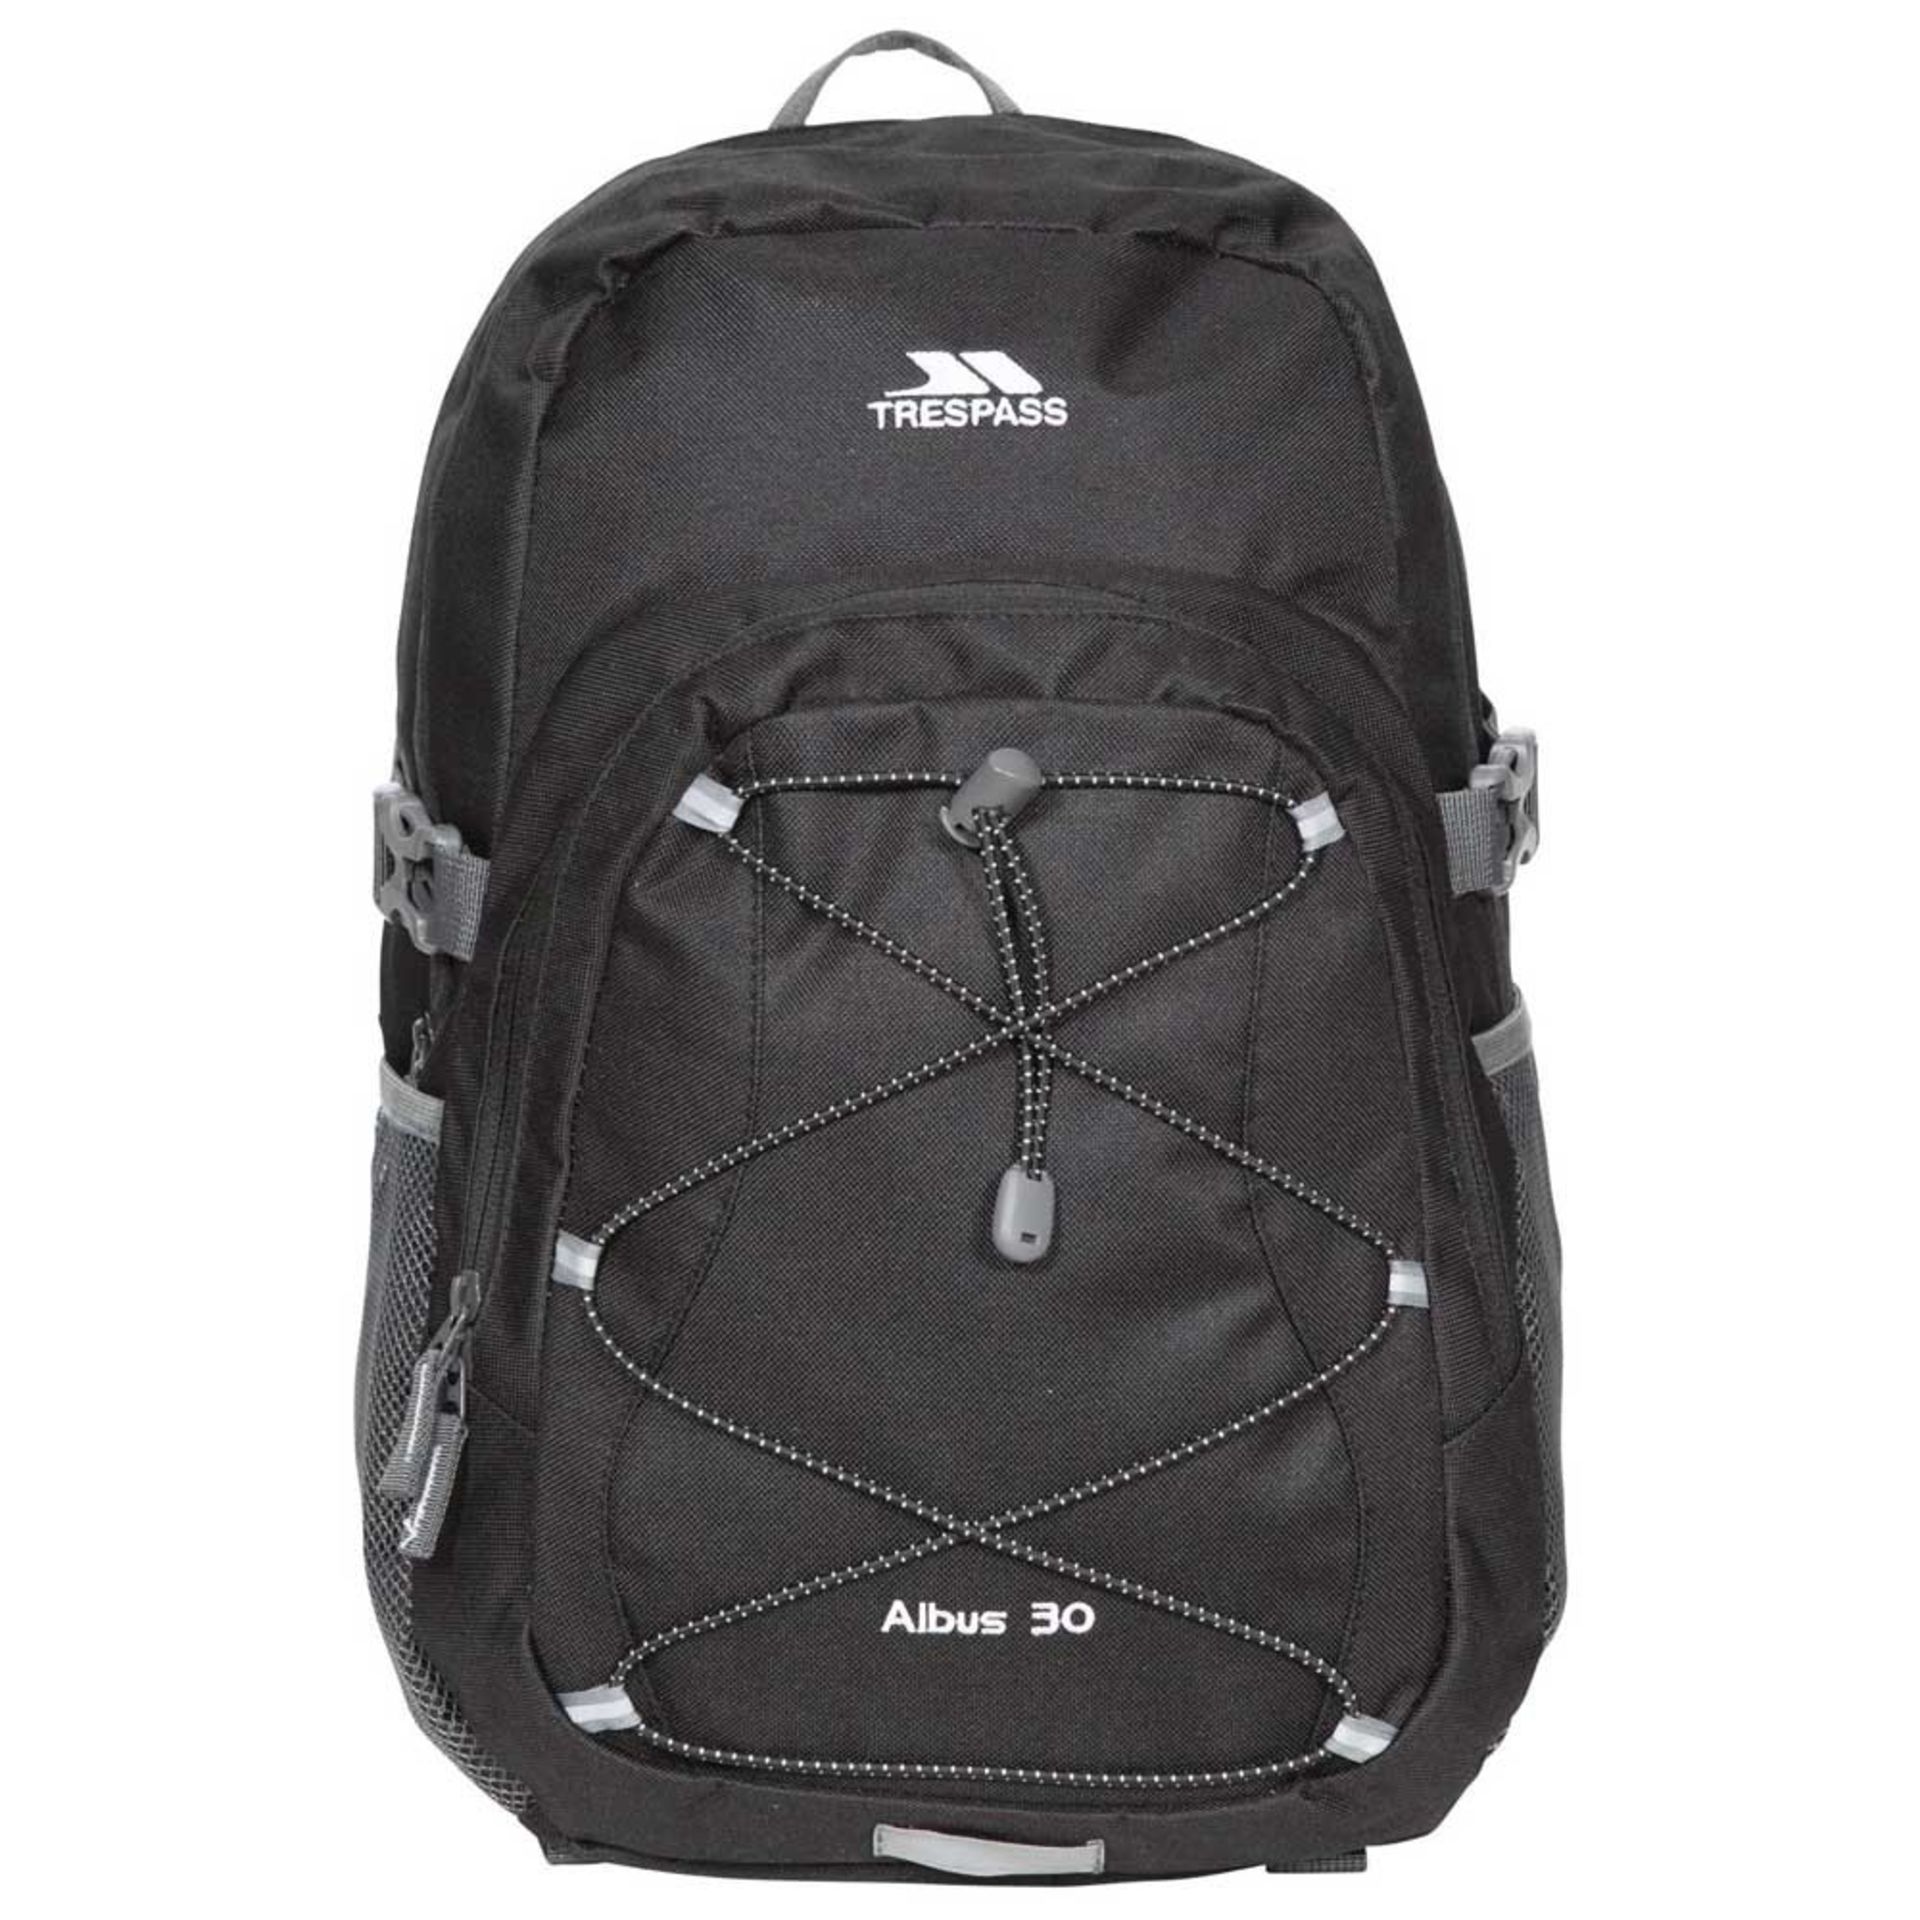 Trespass albus 30 backpack (Delivery Band A)